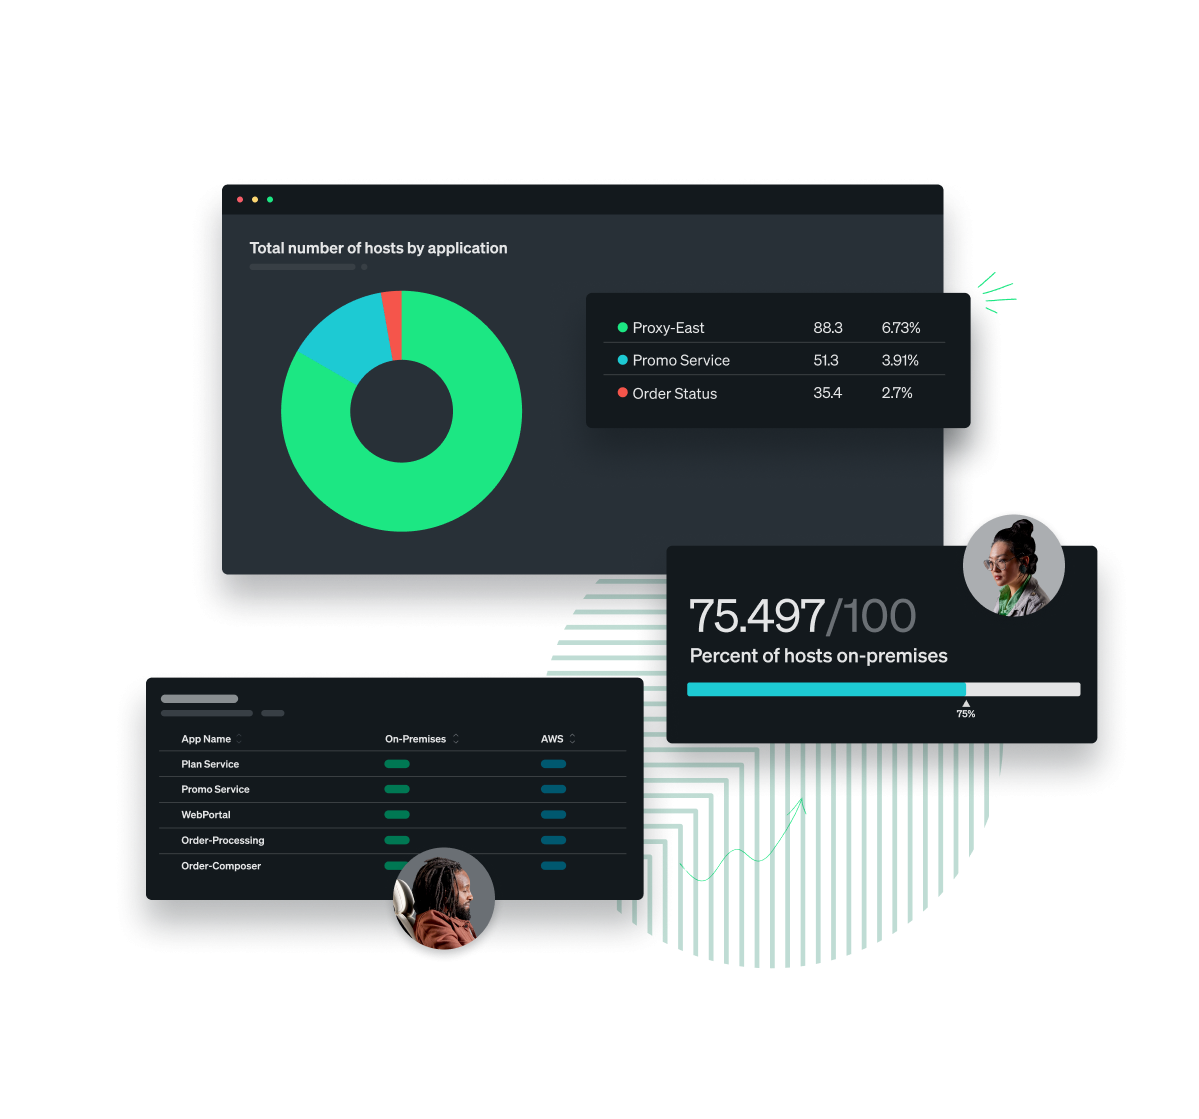 Collage of dashboards and charts overlayed with developer headshots